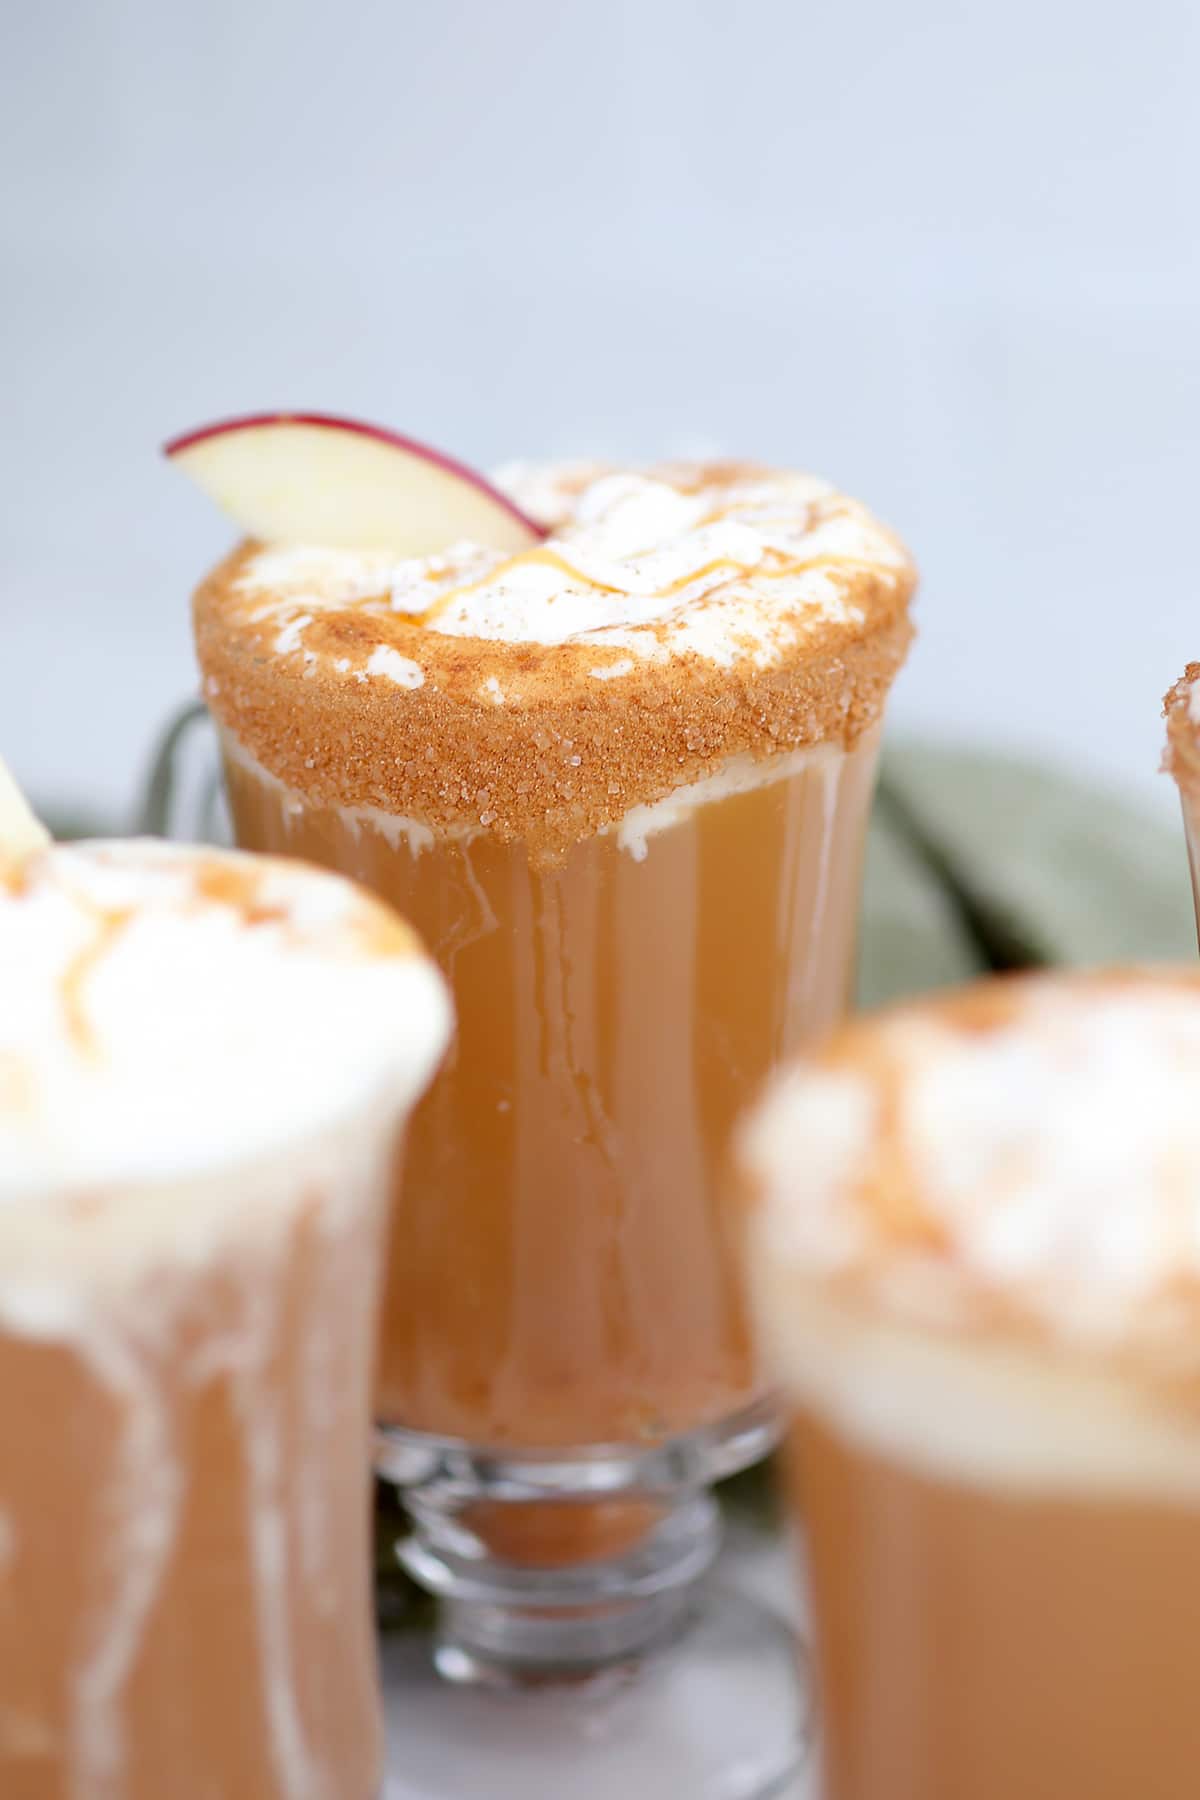 A mug dipped in cinnamon sugar and filled with apple cider, topped with whipped cream, caramel, and an apple slice.